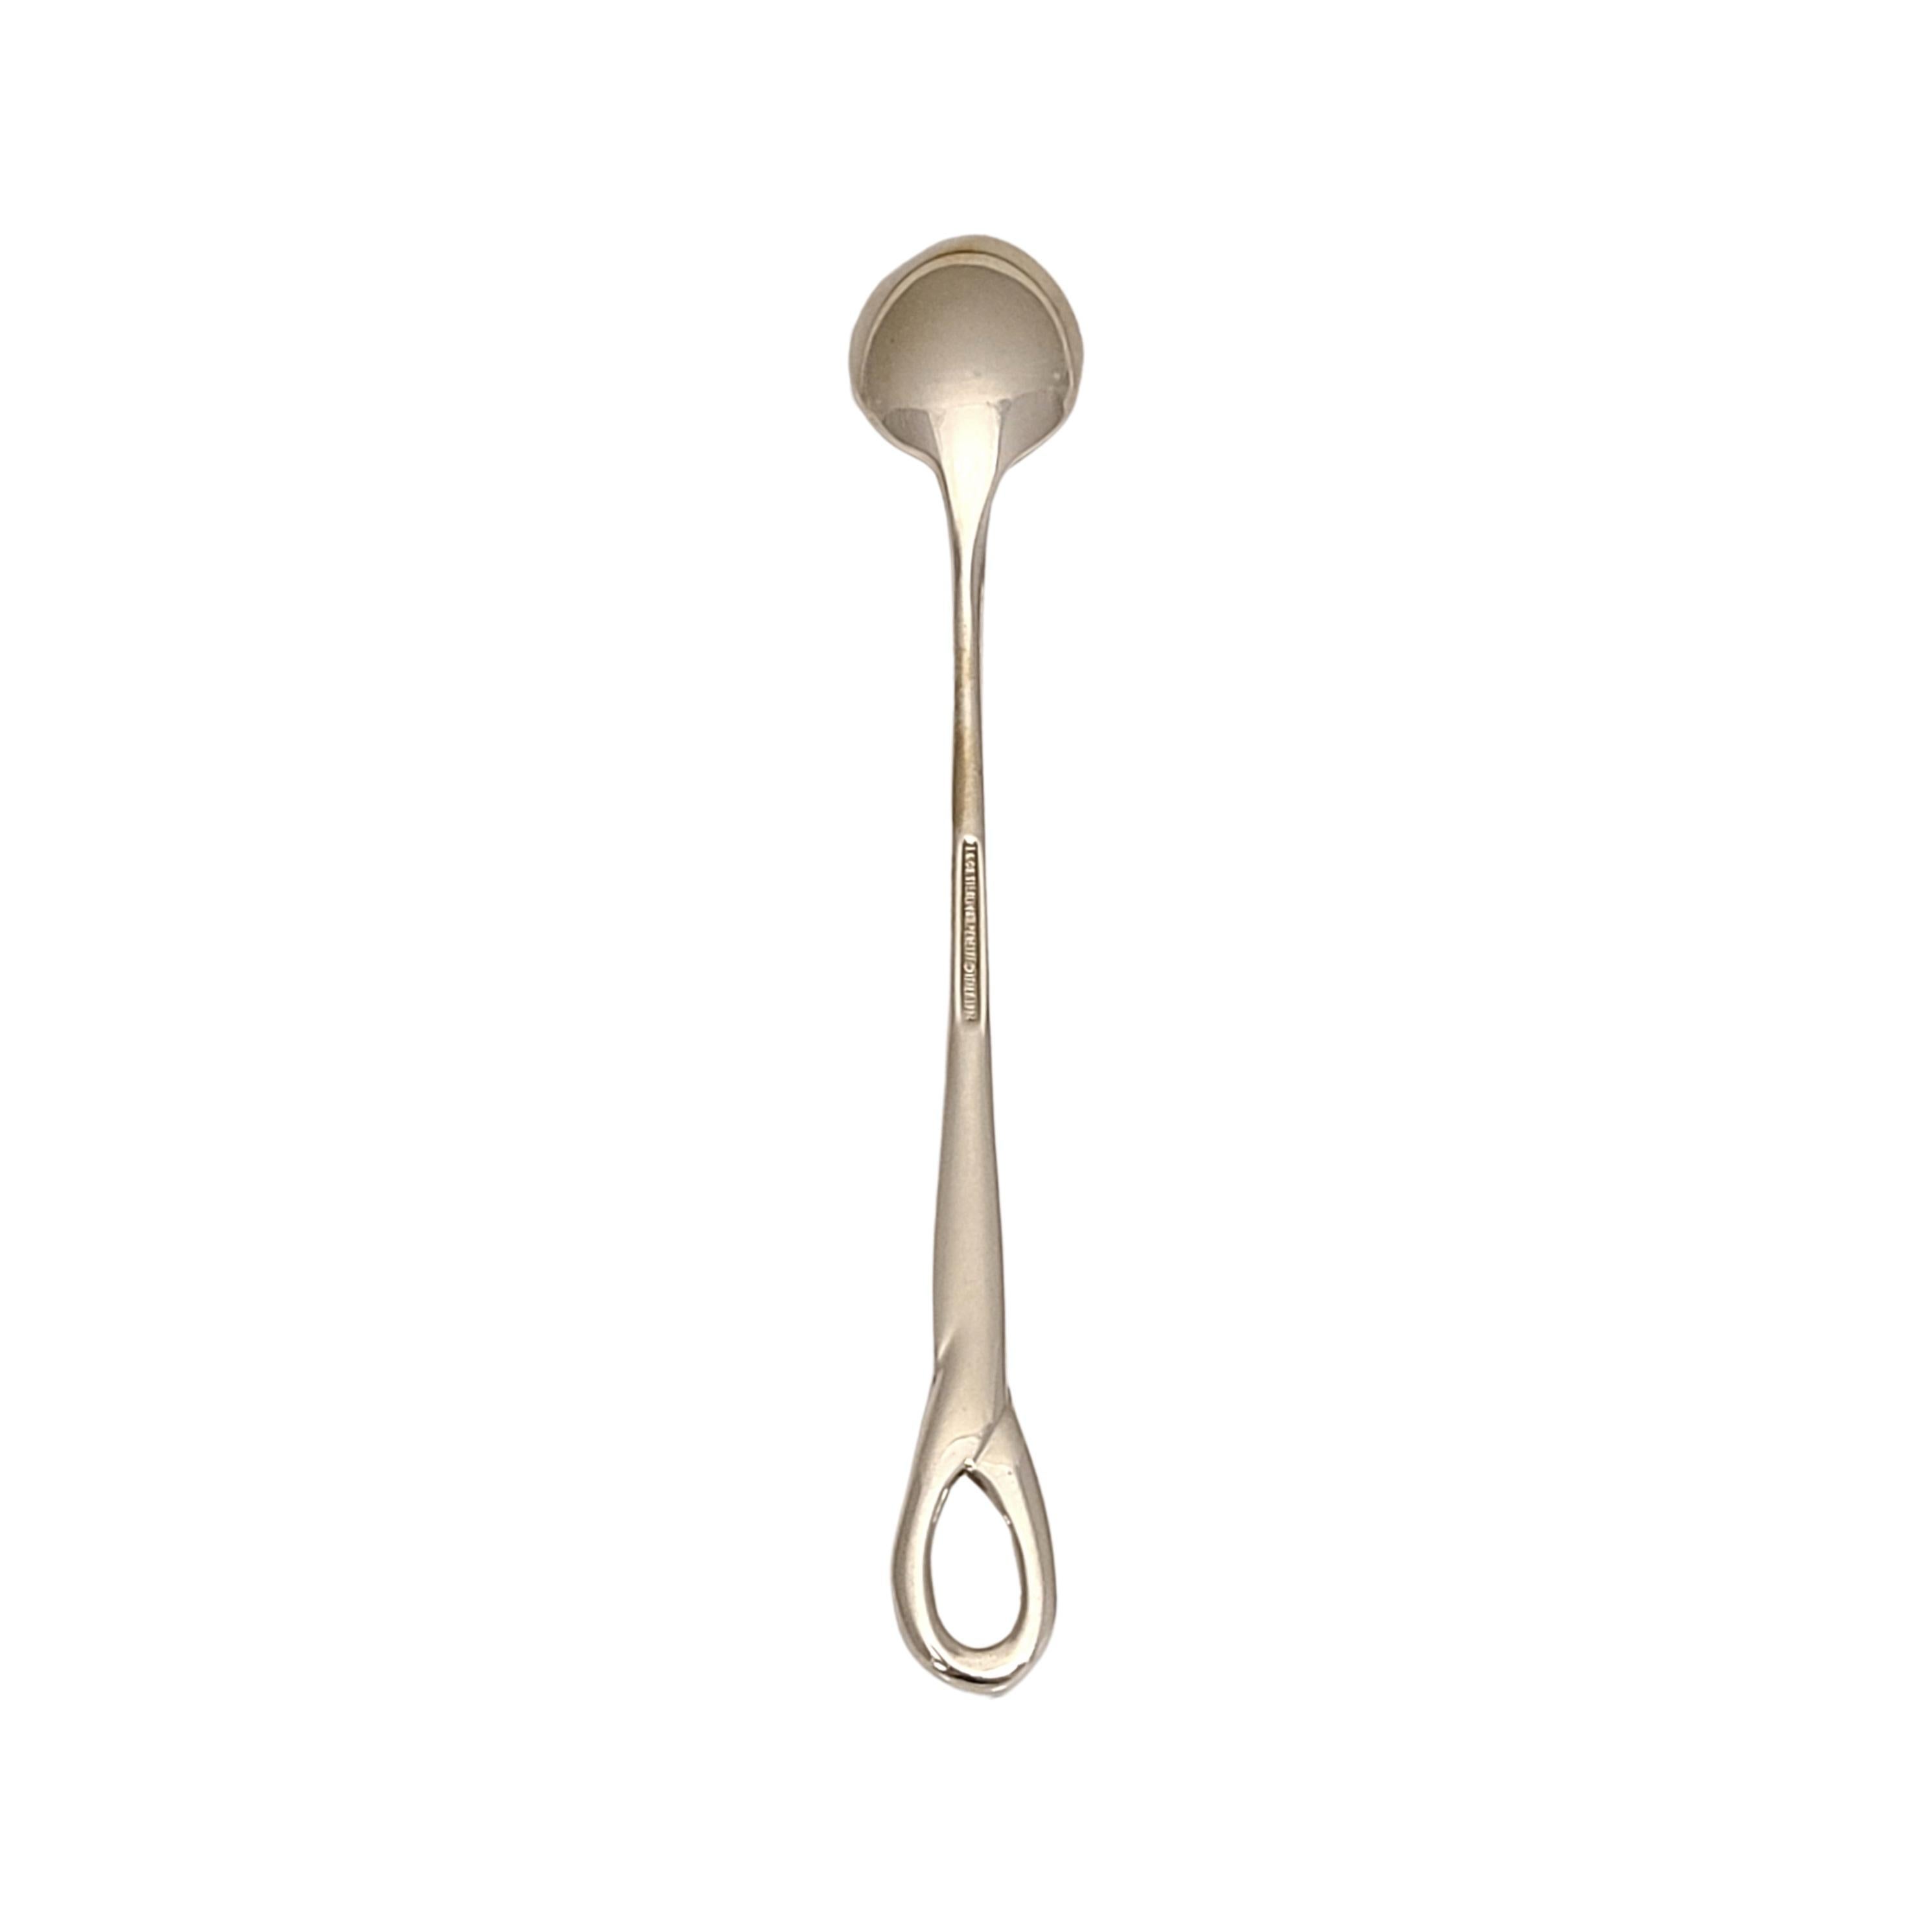 Tiffany & Co sterling silver baby feeding spoon in the Padova pattern by Elsa Peretti.

Monogram appears to be C

Padova is a simple and classic design featuring a loop at the top of the handle, named for the Italian city in which it was created in.